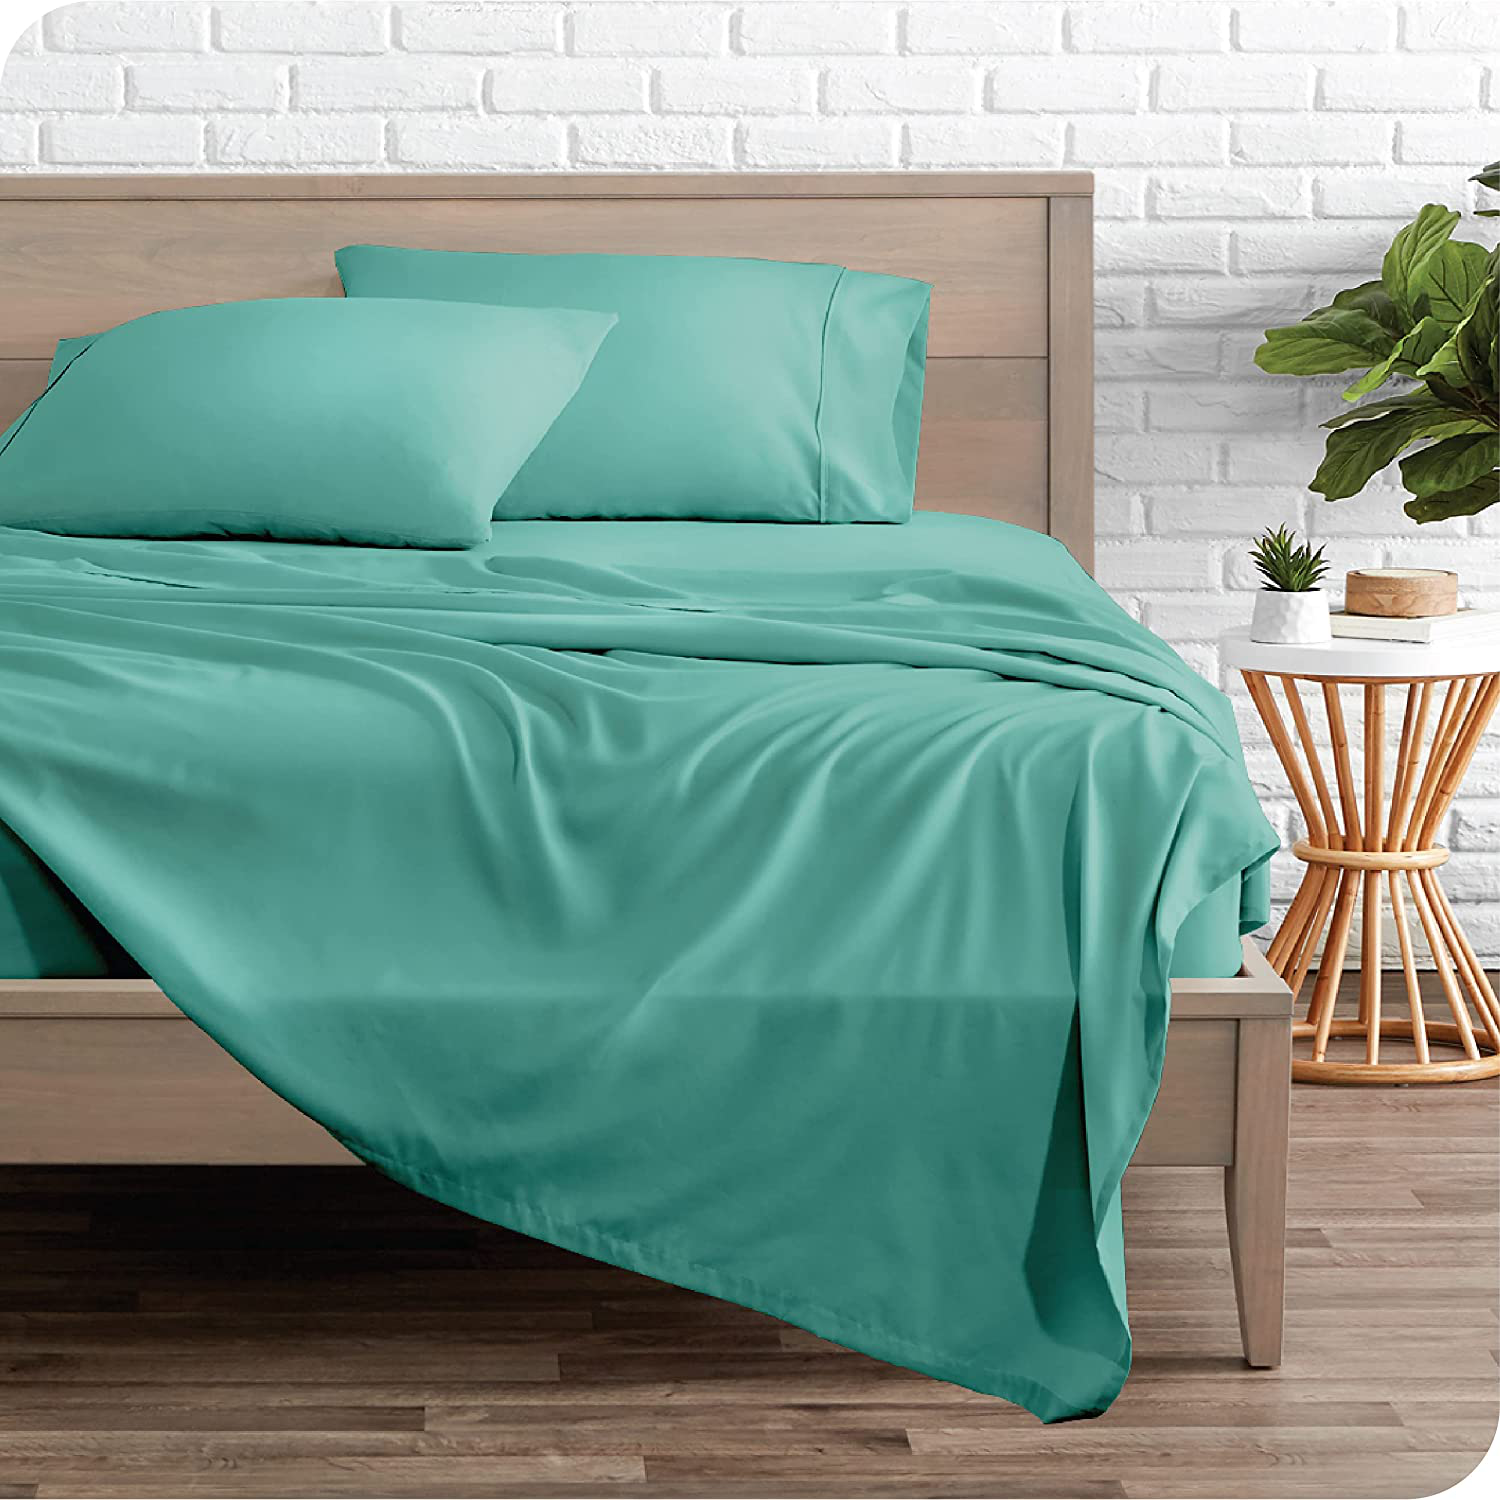 Bare Home Twin XL Sheet Set - College Dorm Size - Premium 1800 Ultra-Soft Microfiber Twin Extra Long Sheets - Double Brushed - Twin XL Sheets Set - Deep Pocket - Bed Sheets (Twin XL, Turquoise)